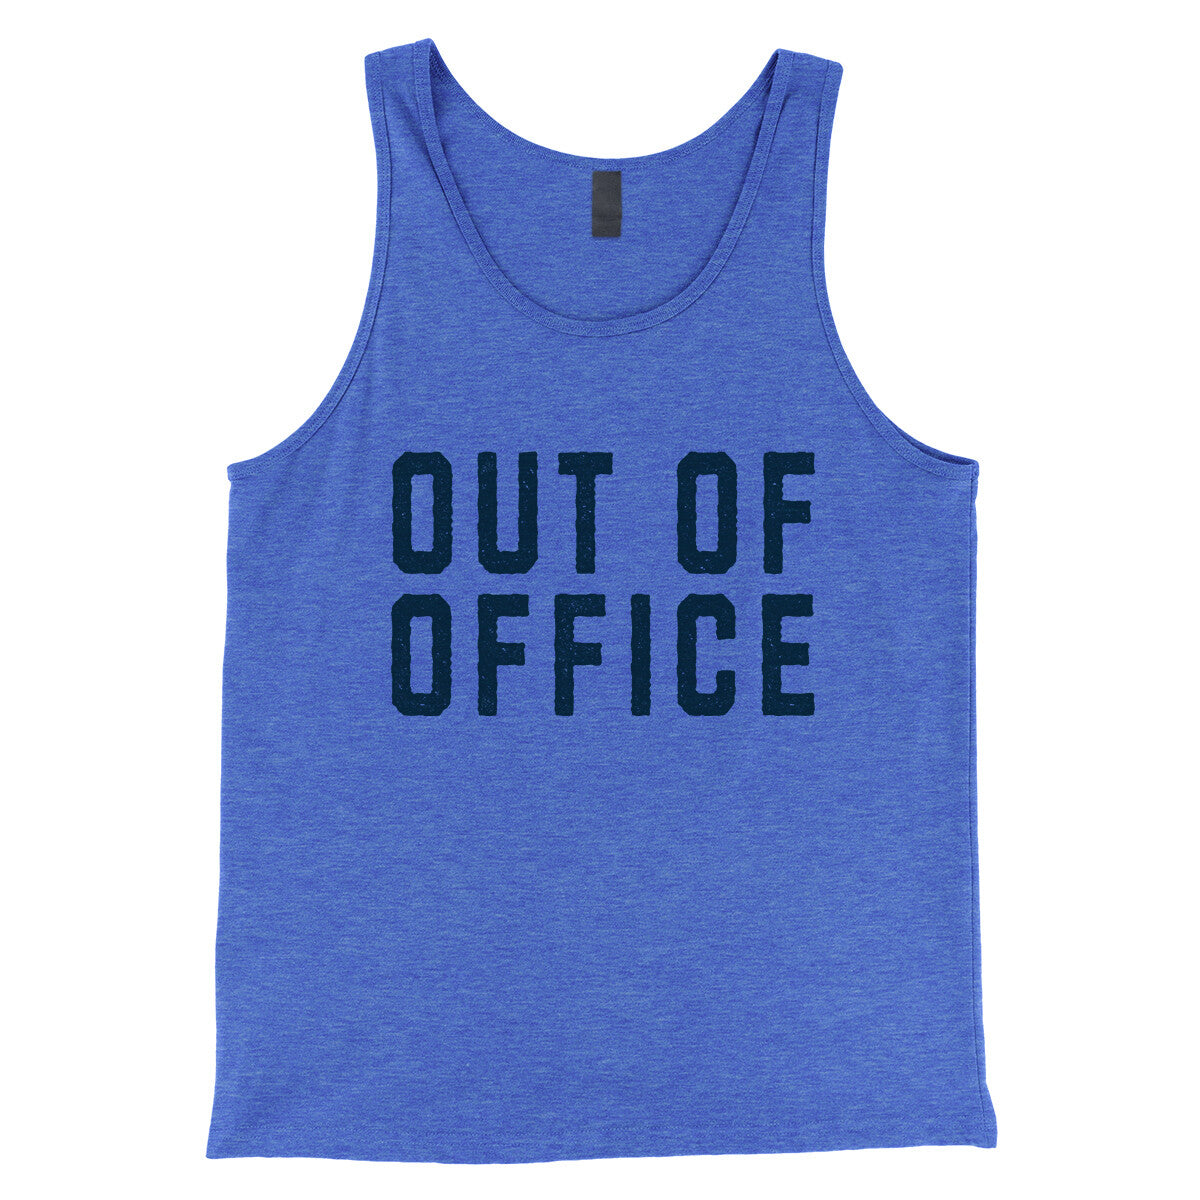 Out of Office in True Royal TriBlend Color